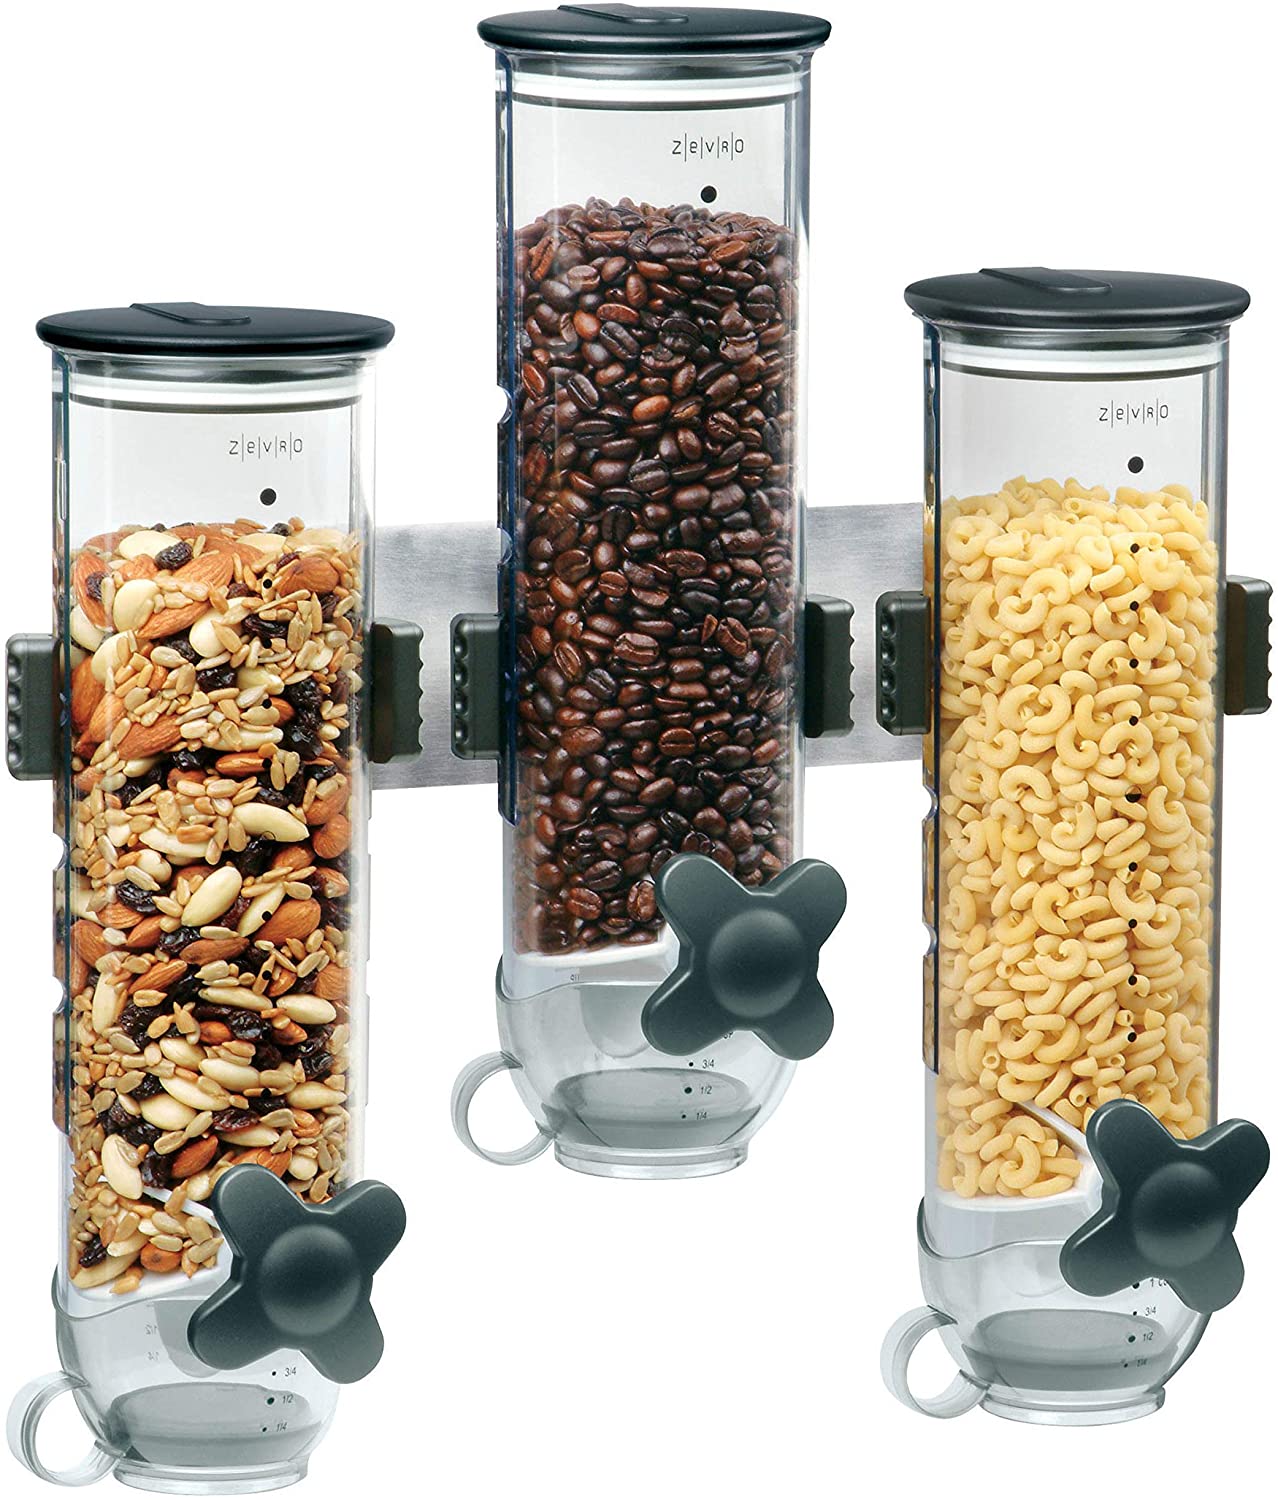 Best Cereal Dispenser in 2020 Review and Guide